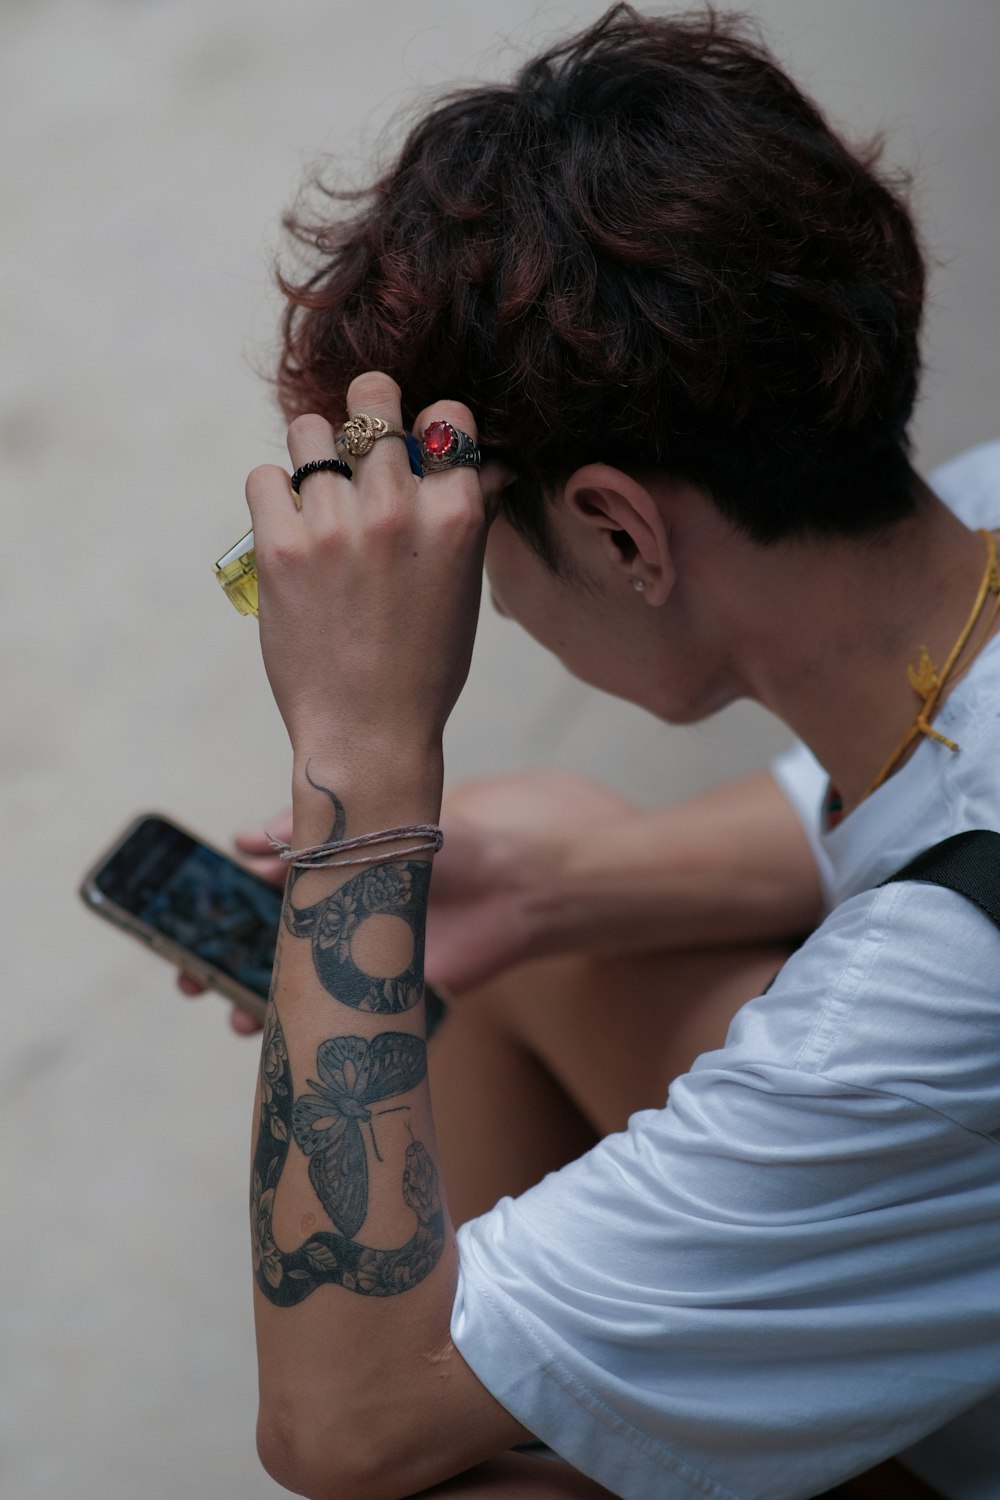 a person with tattoos holding a cell phone